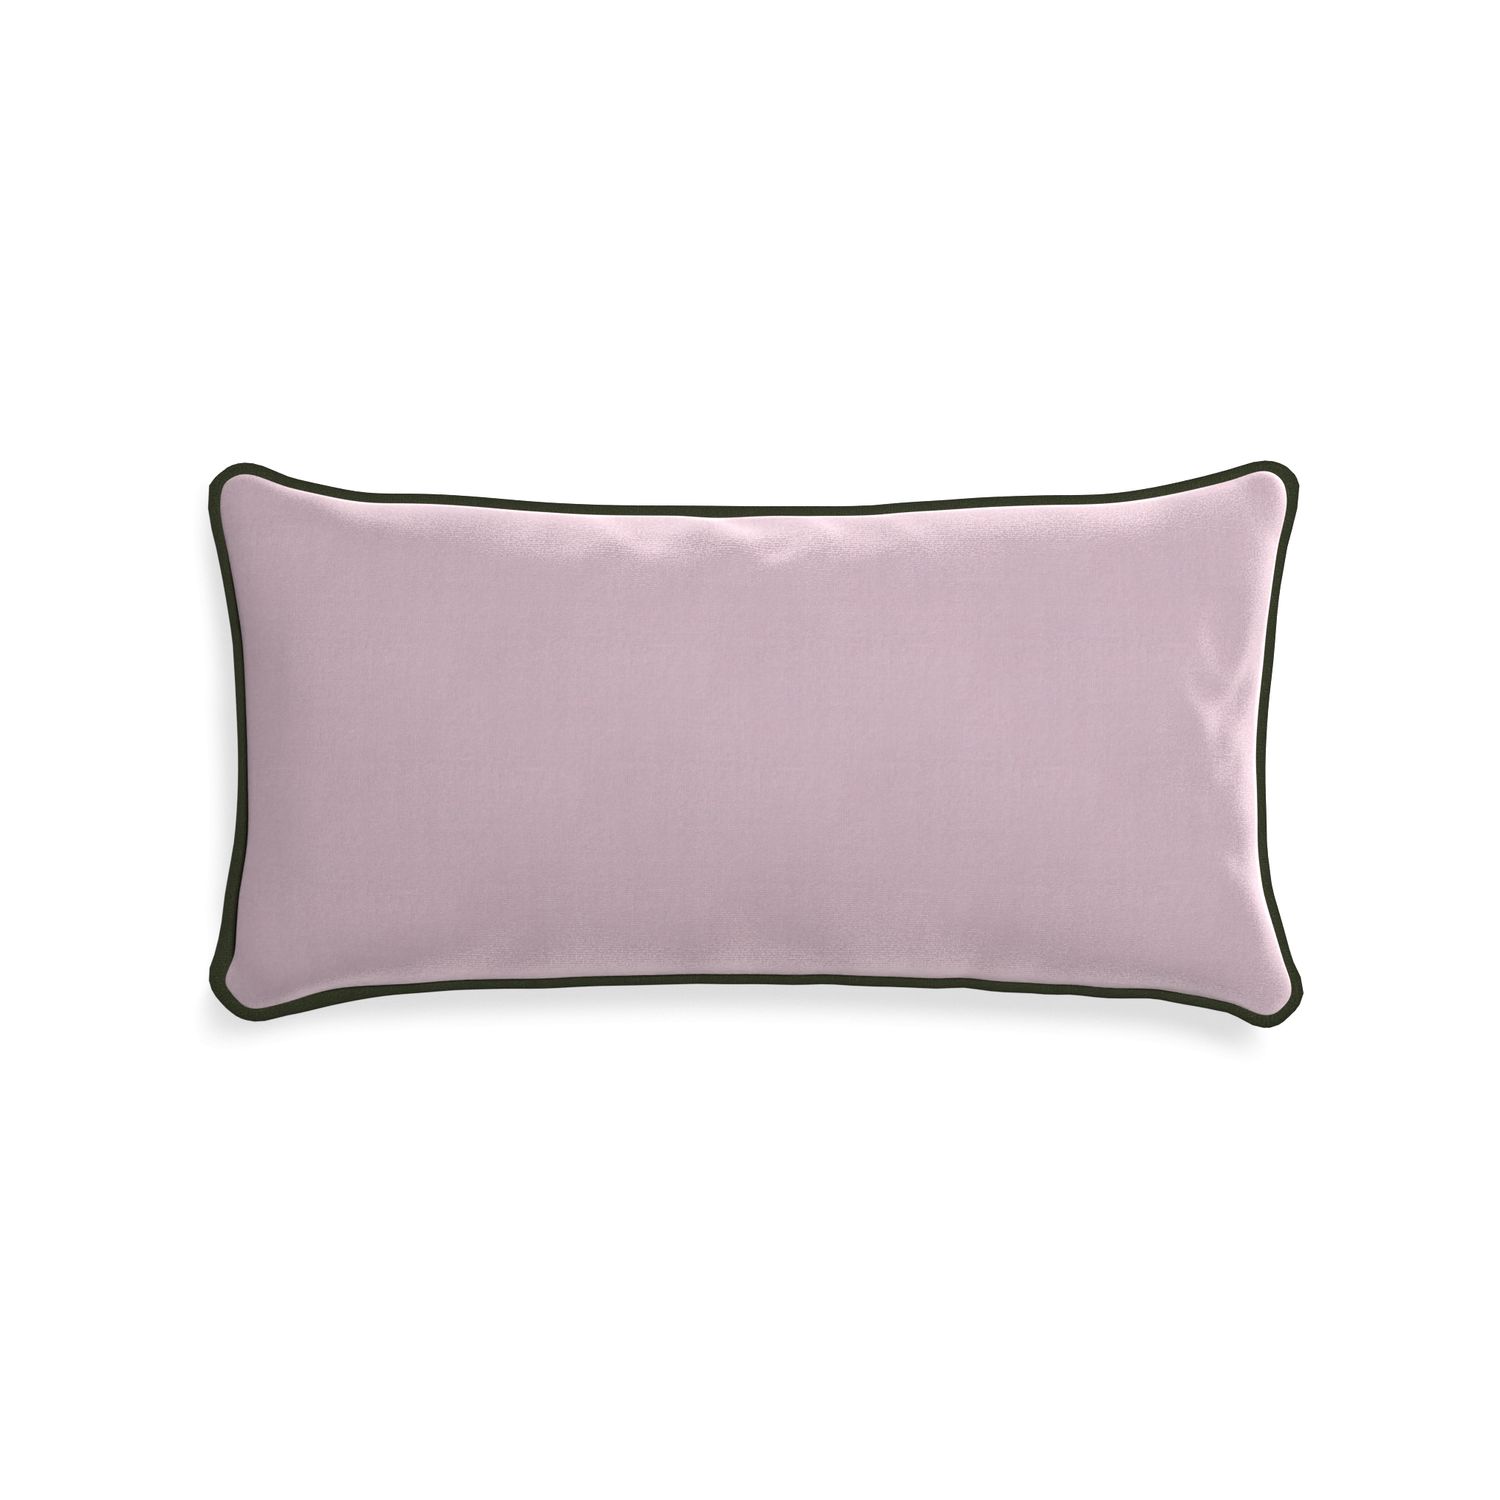 Midi-lumbar lilac velvet custom lilacpillow with f piping on white background